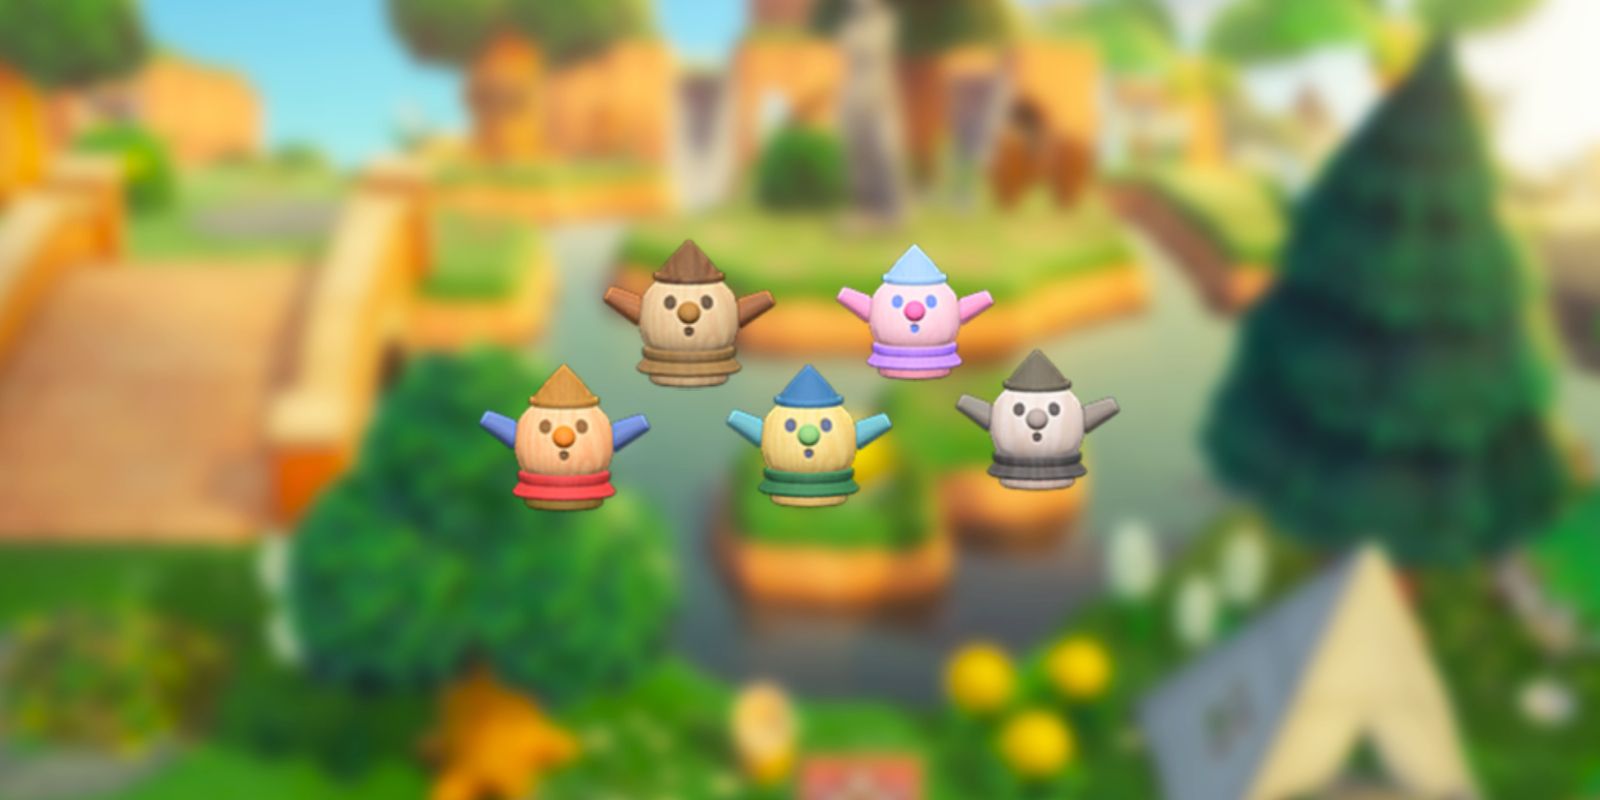 All New Gyroids In Animal Crossing 2.0 Tockoid